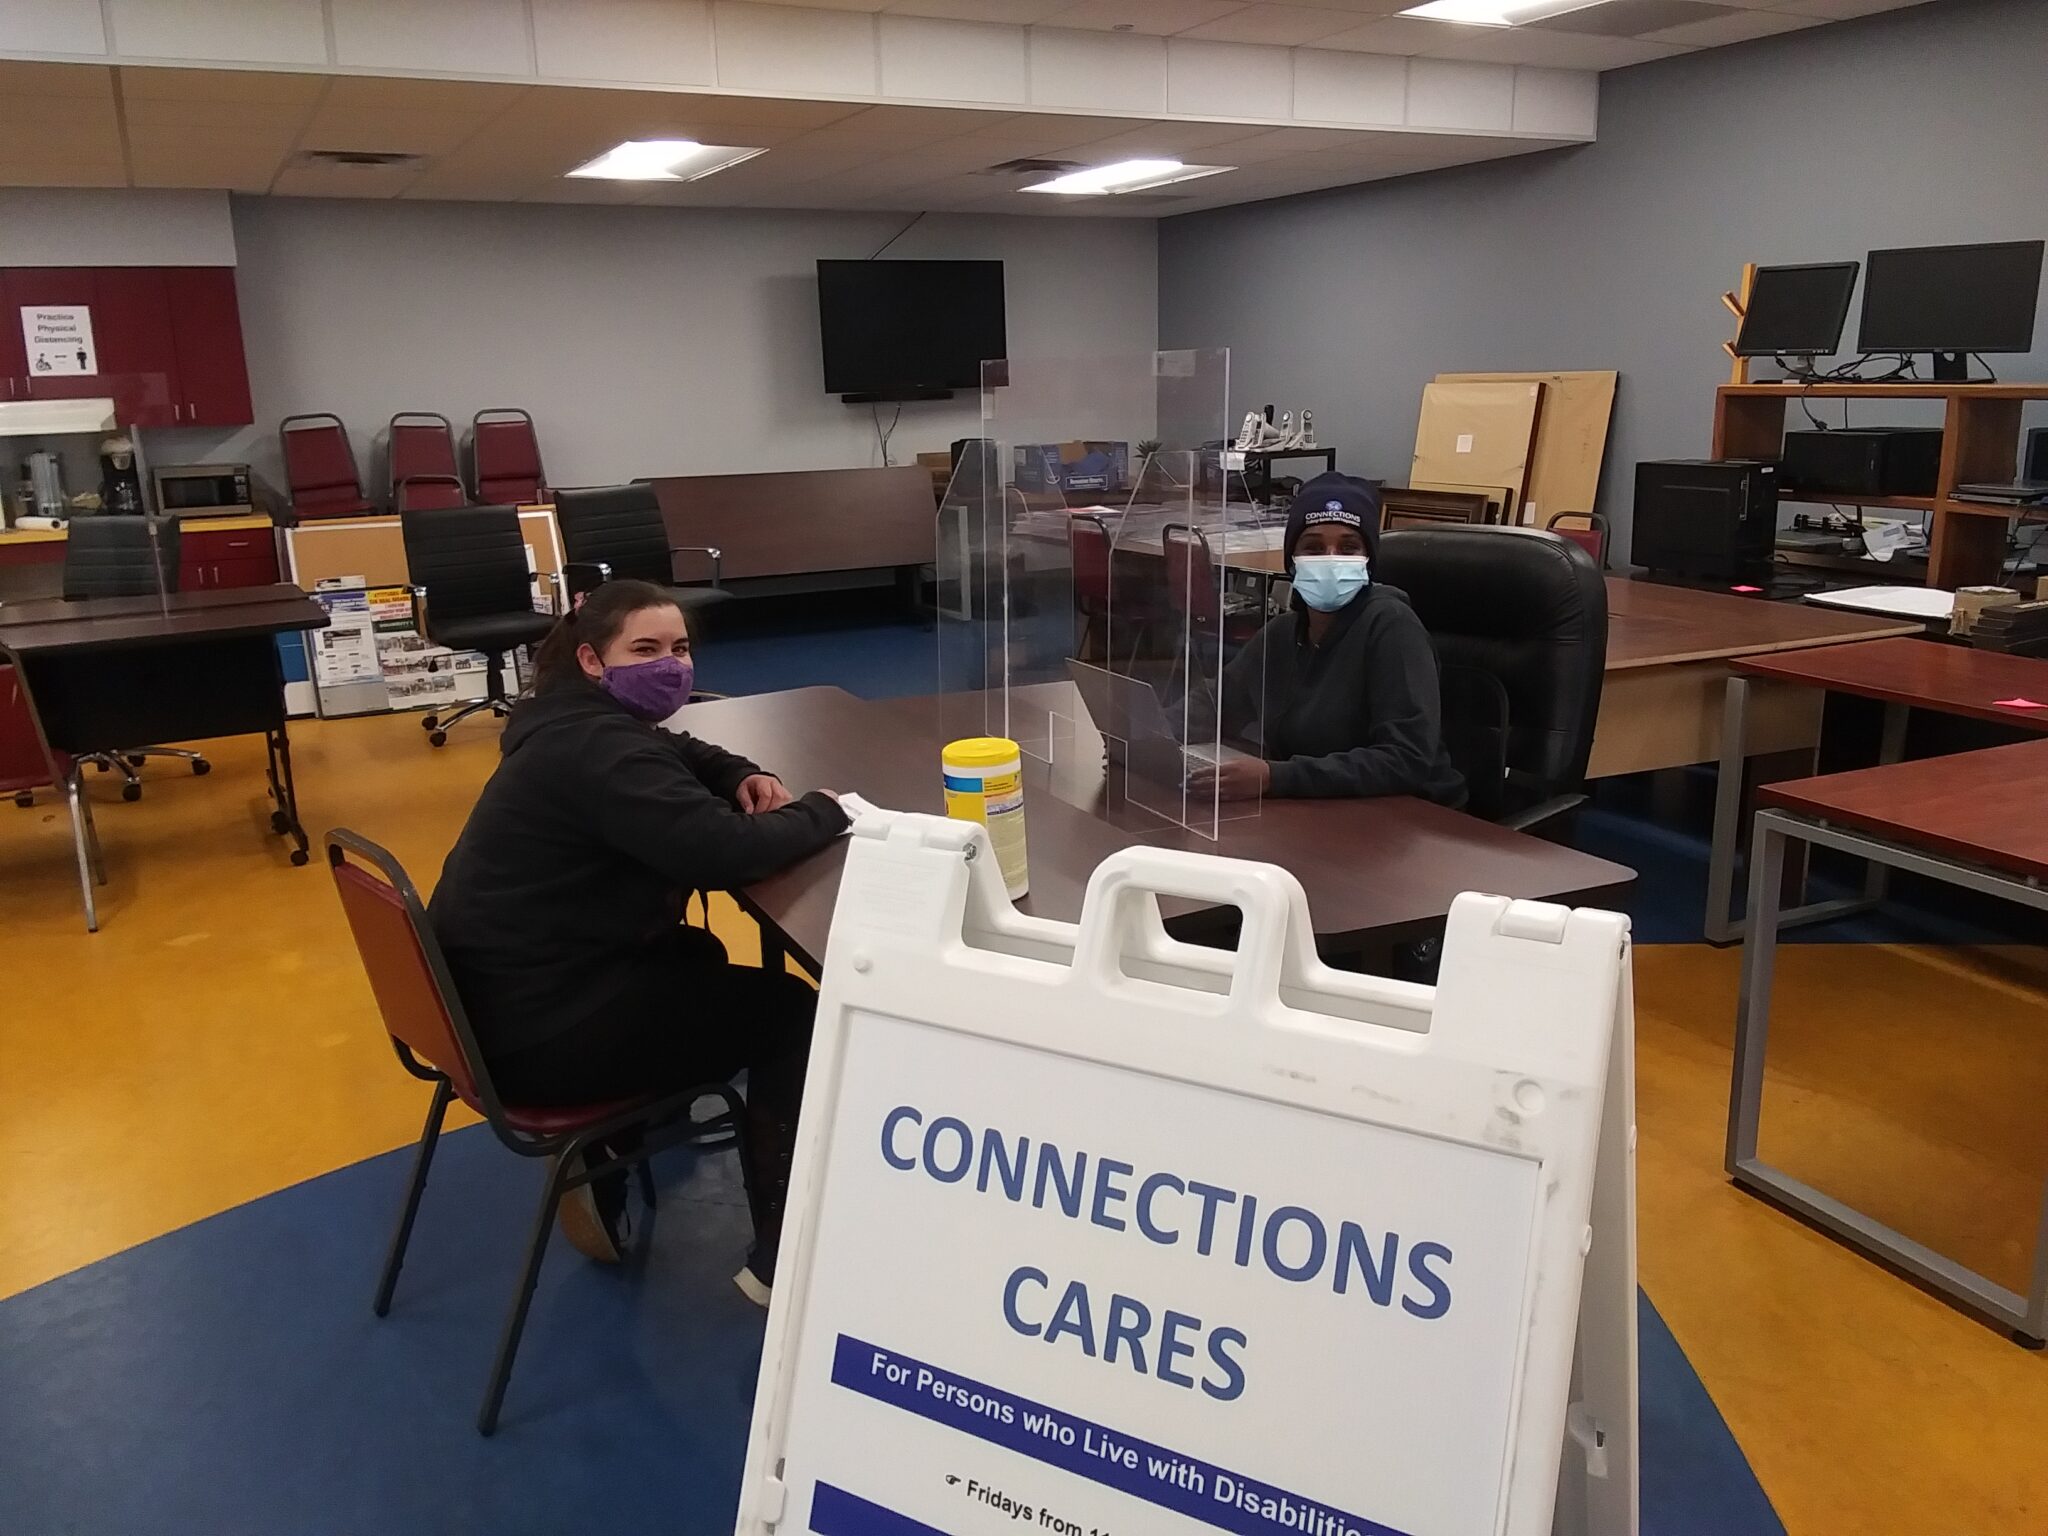 Connections Cares